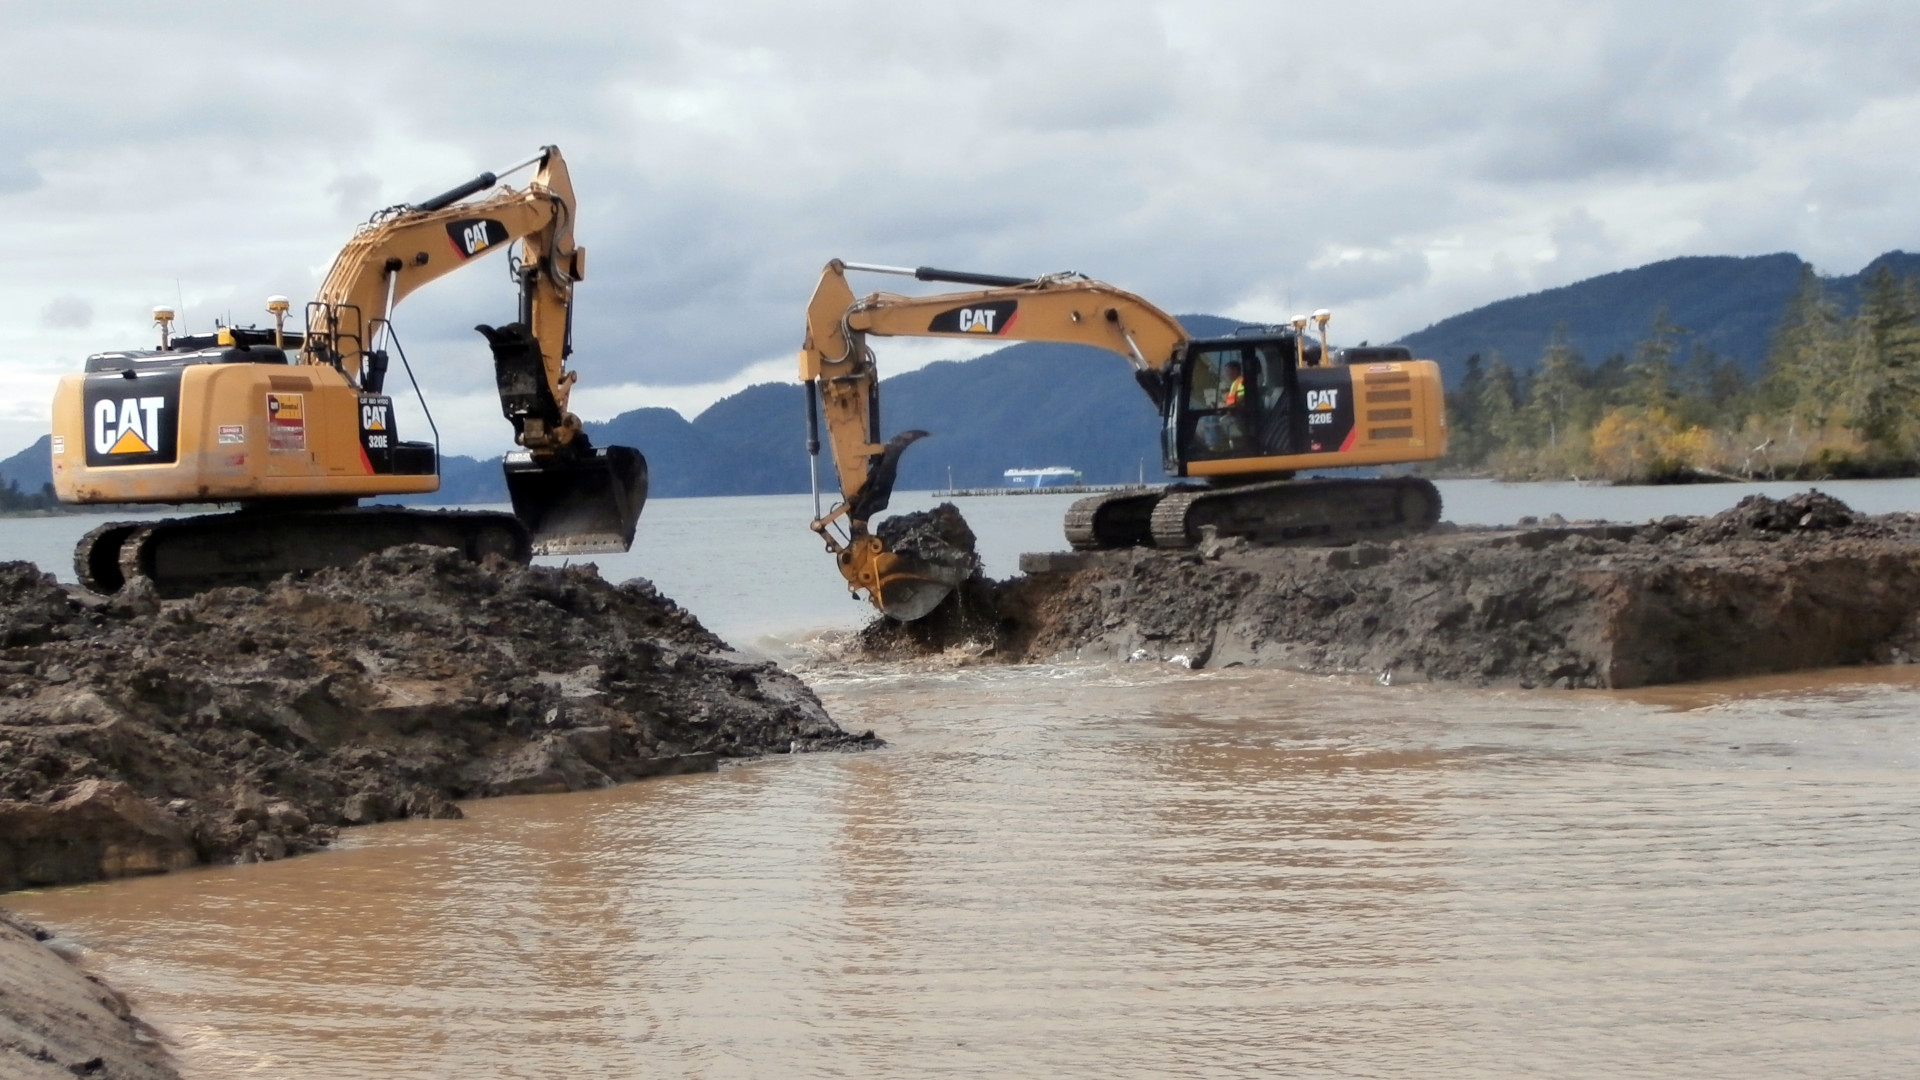 Water flows through a gap in a levee as construction equipment continues removal efforts.